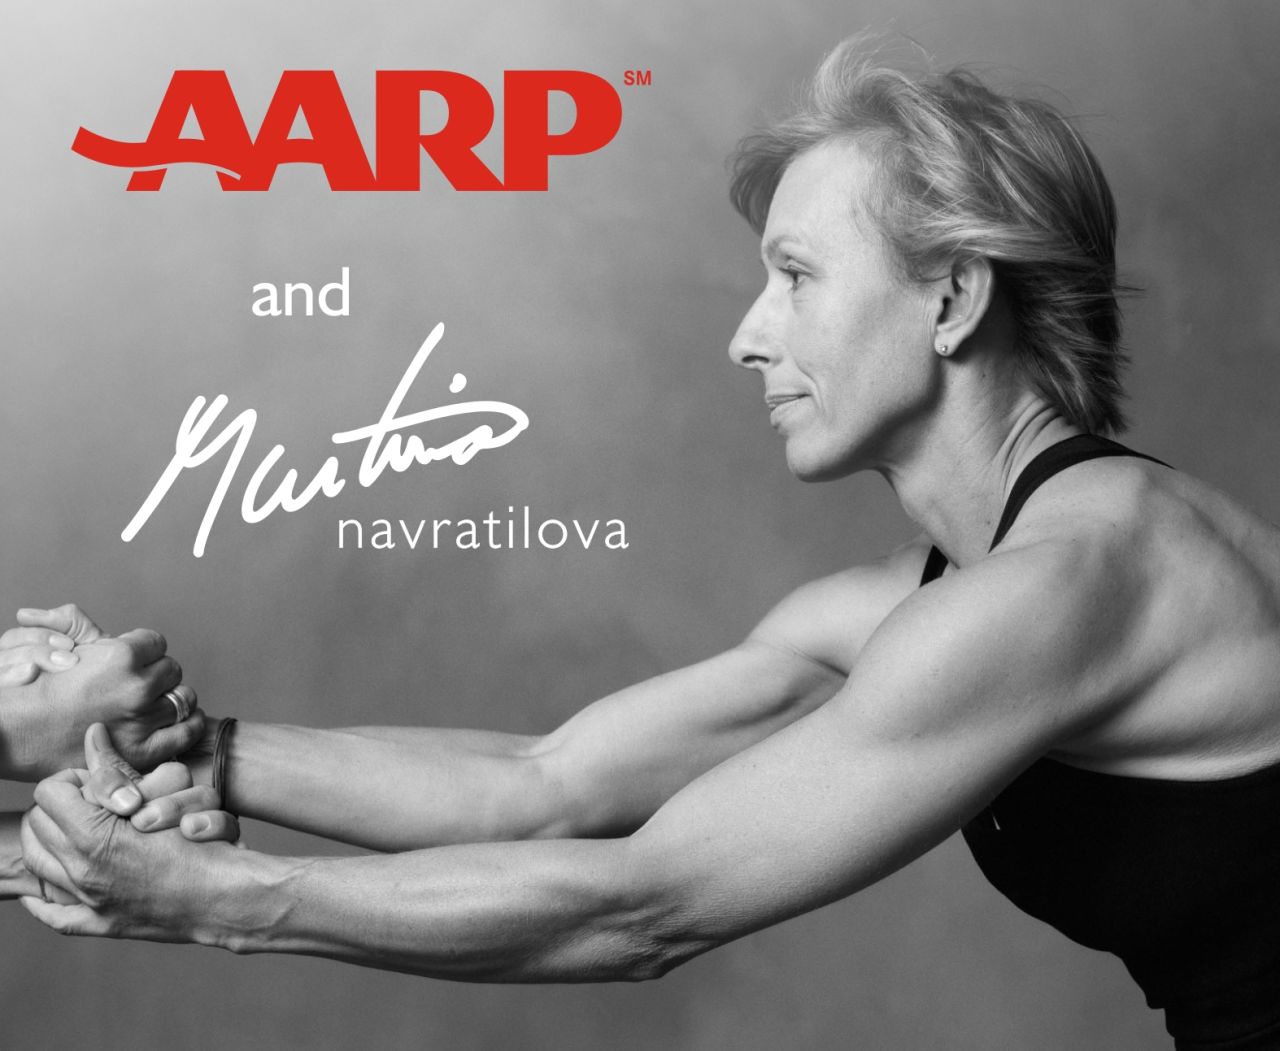 Tennis great Martina Navratilova works with AARP on a campaign to get people over 50 physically active.